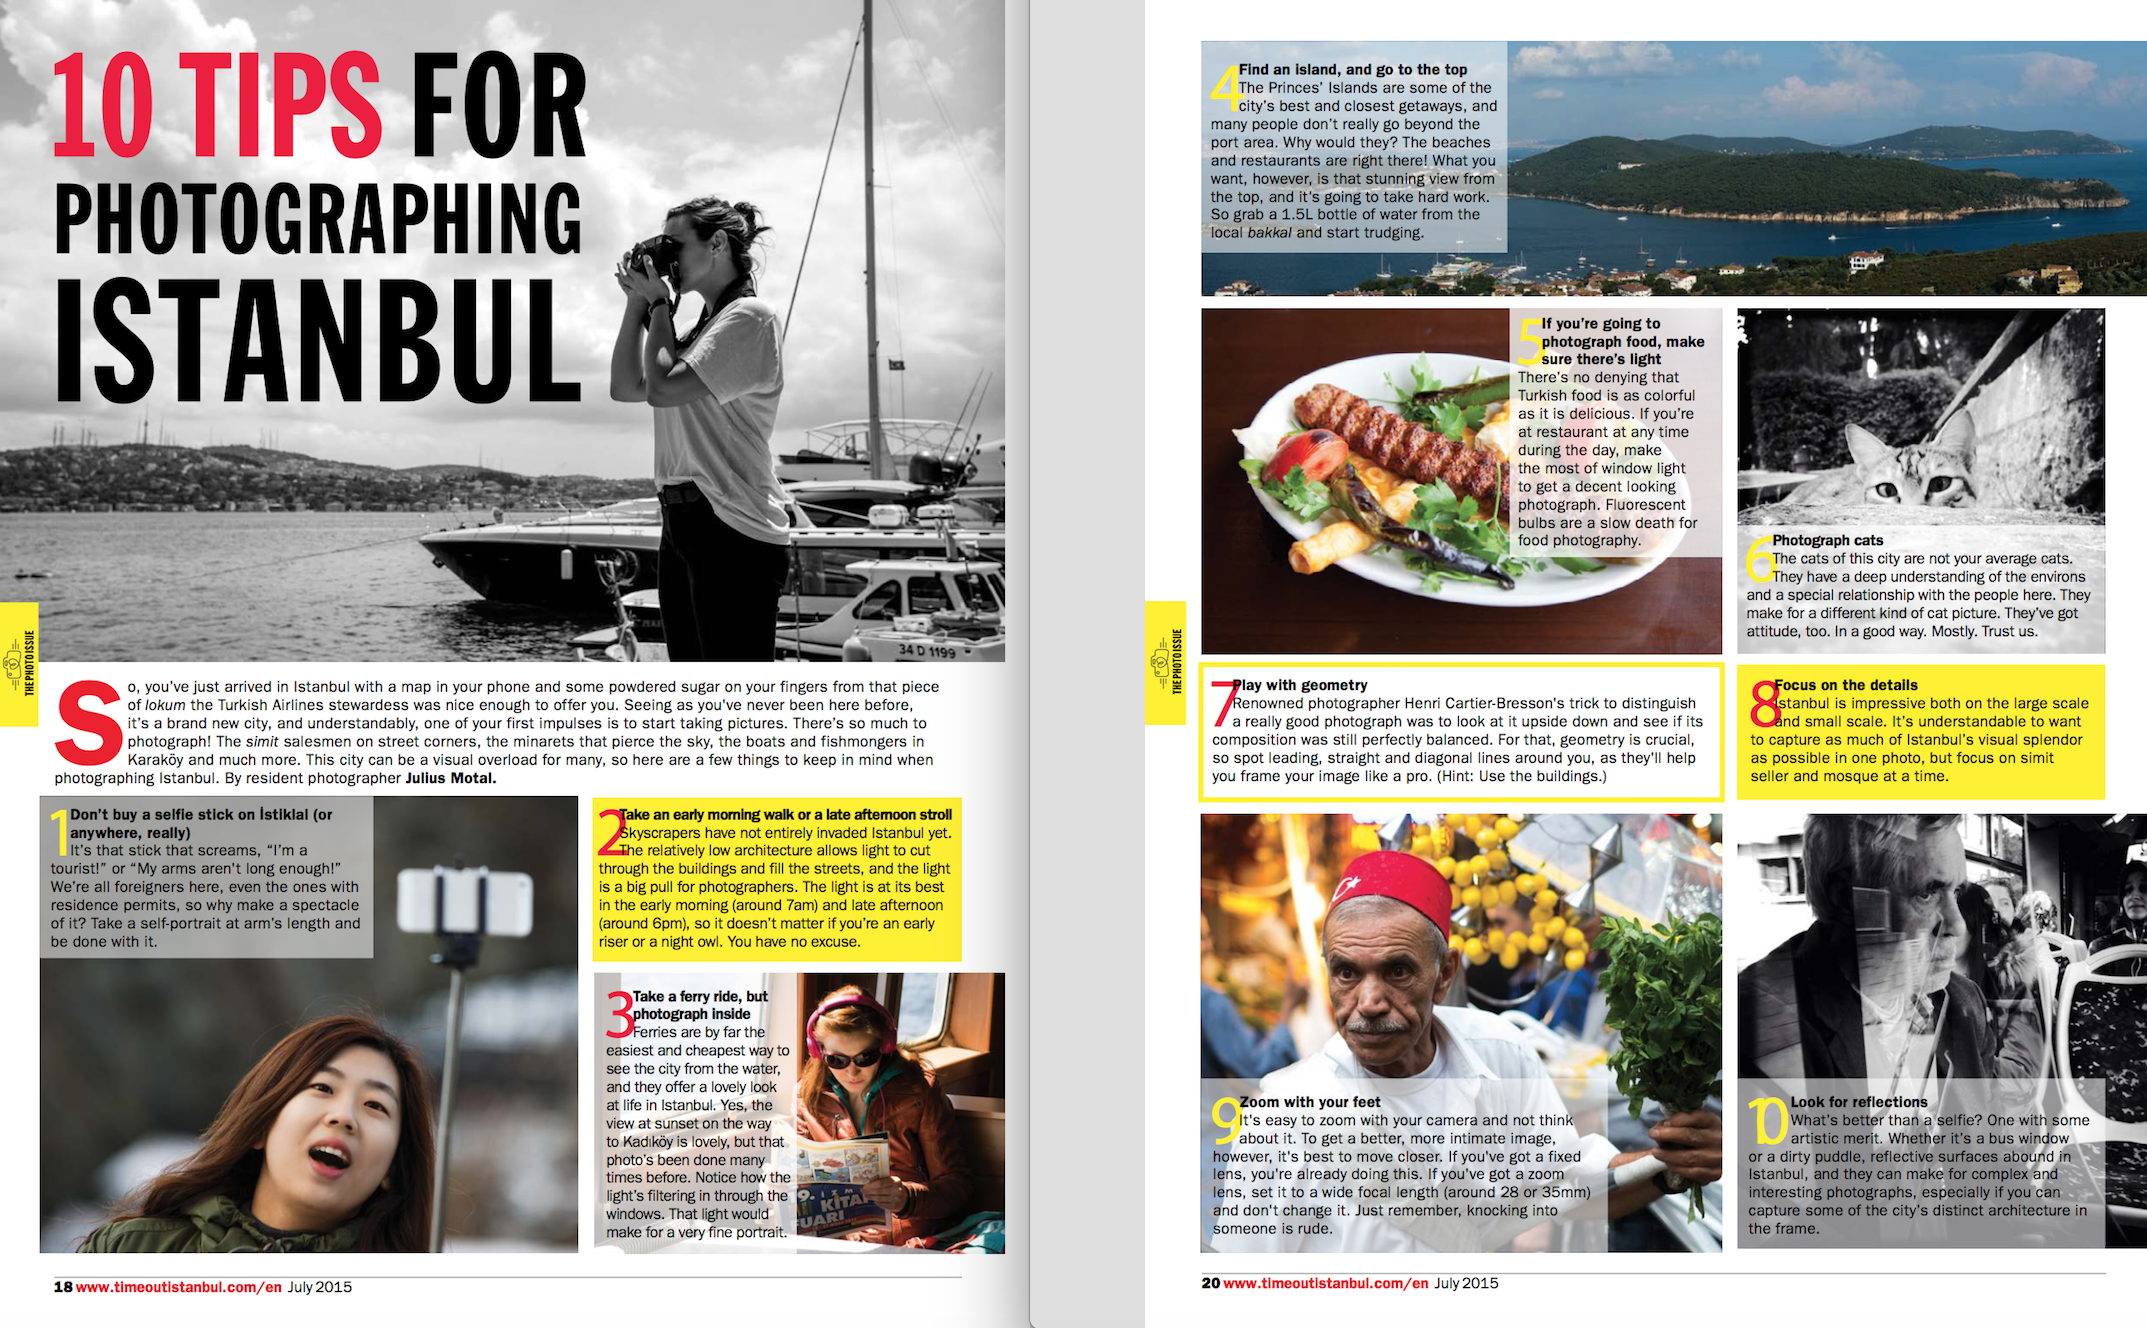 201507 10 tips Time Out Istanbul - Julius Motal.png